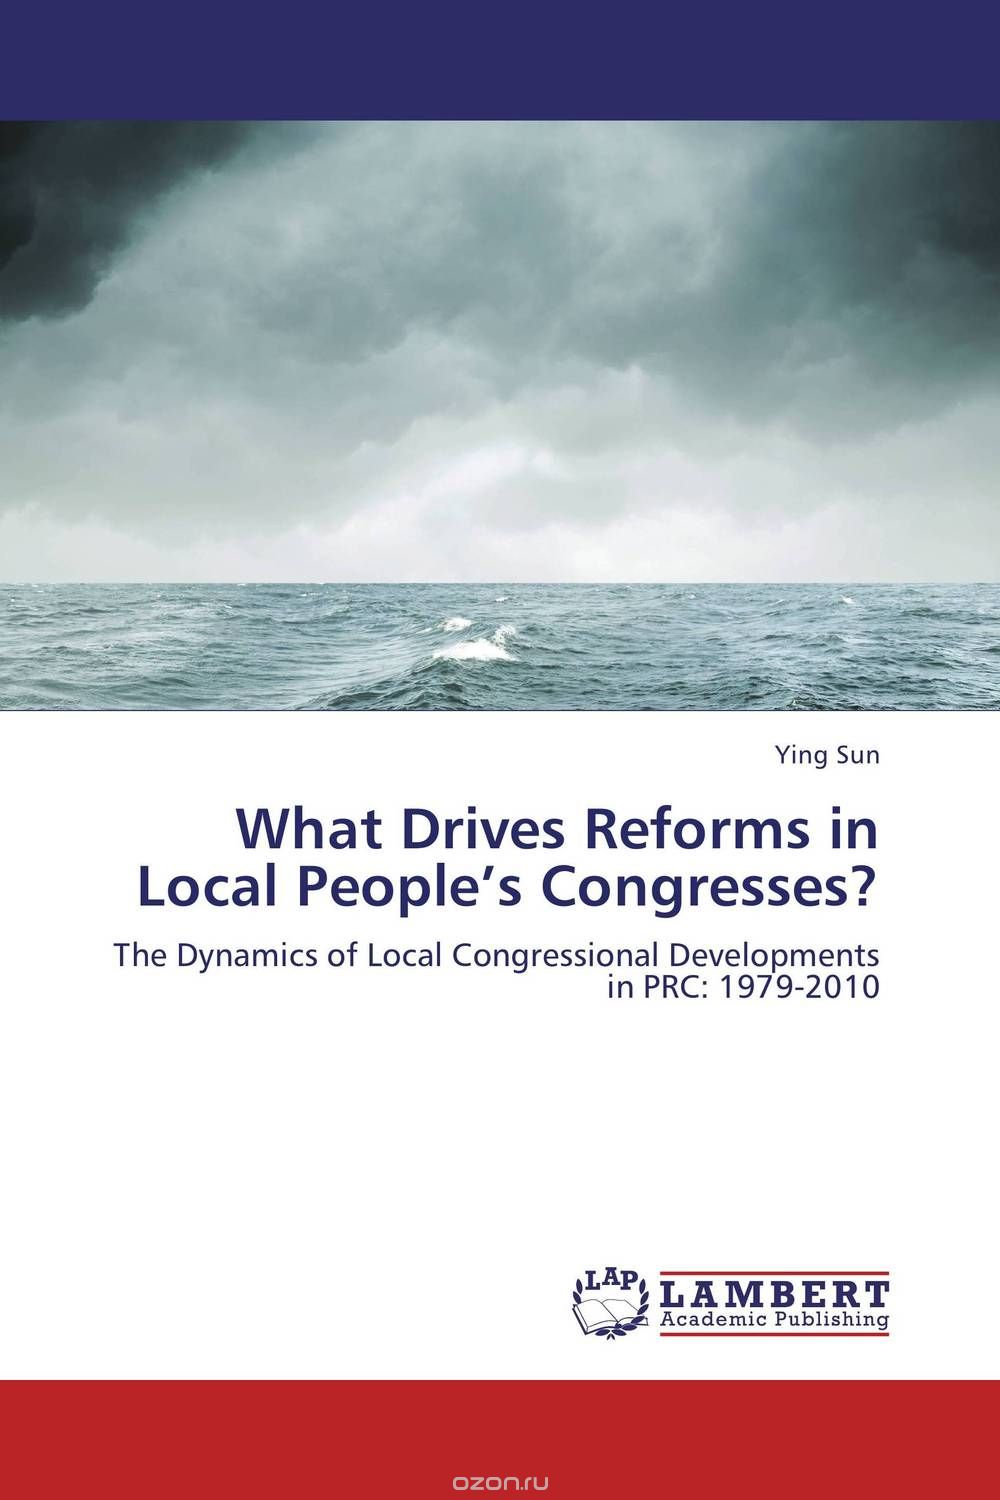 Скачать книгу "What Drives Reforms in Local People’s Congresses?"